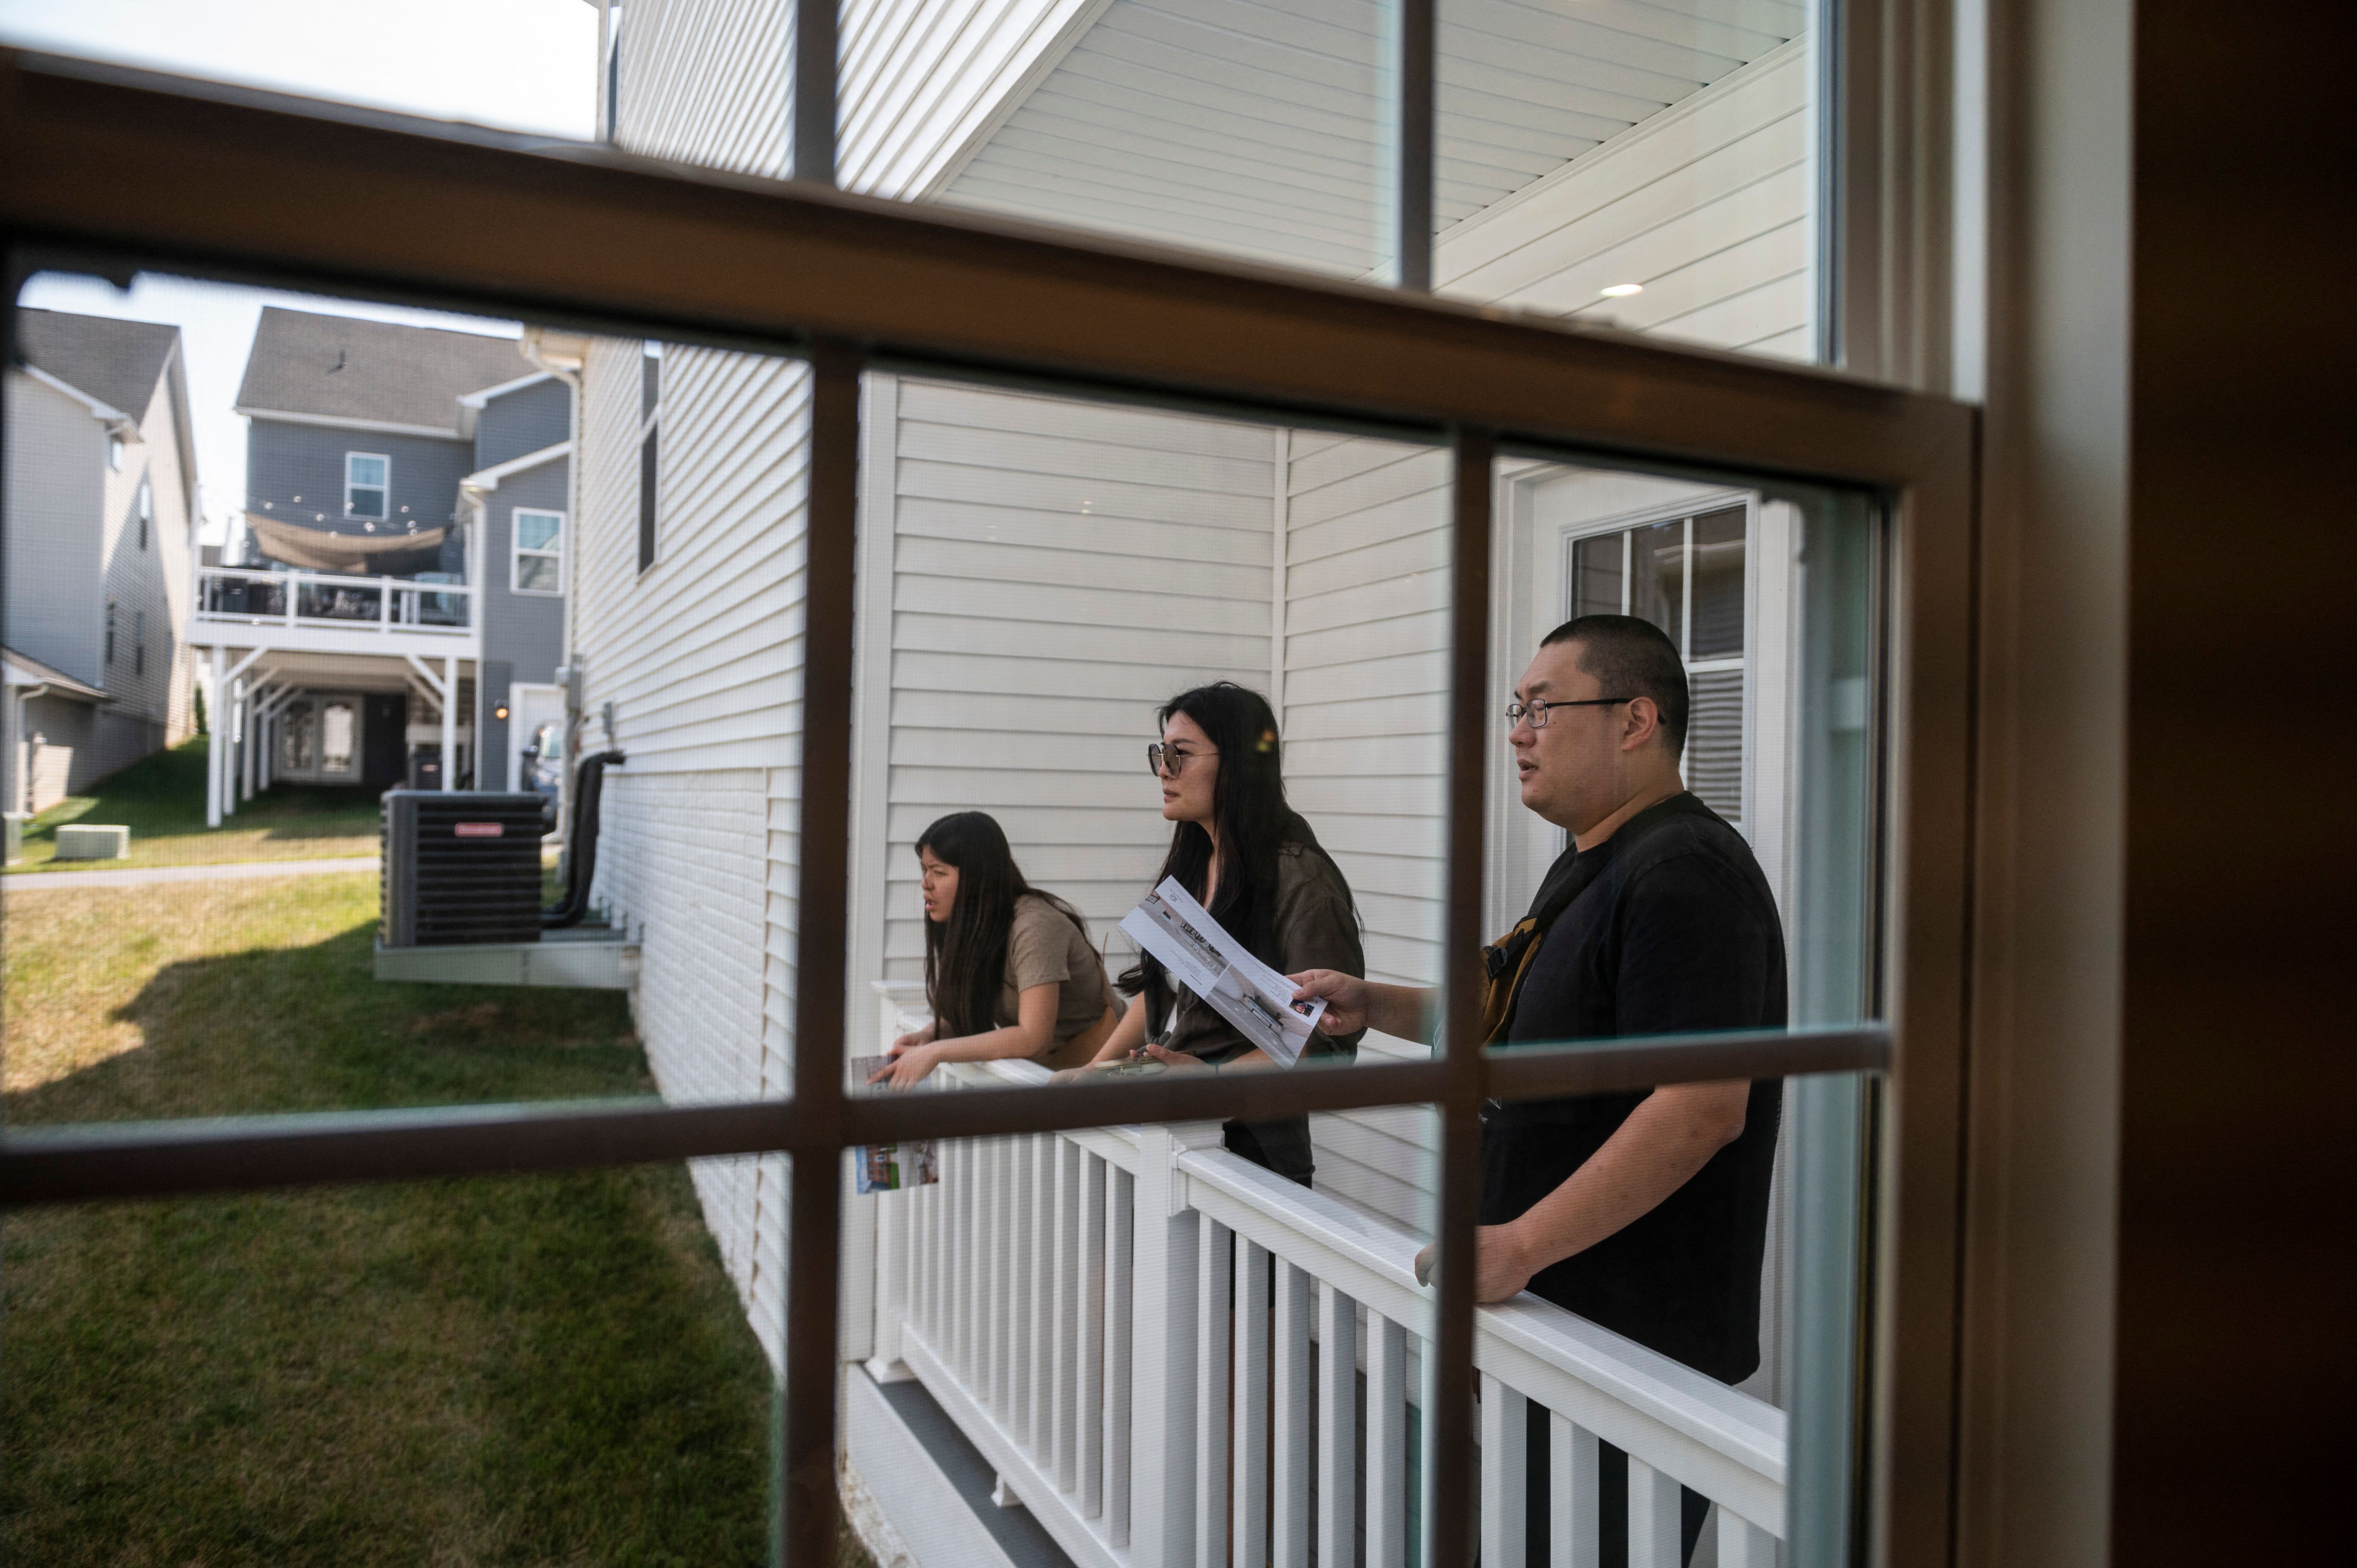 Pinched homebuyers turn to adjustable-rate mortgages to make the payment math work